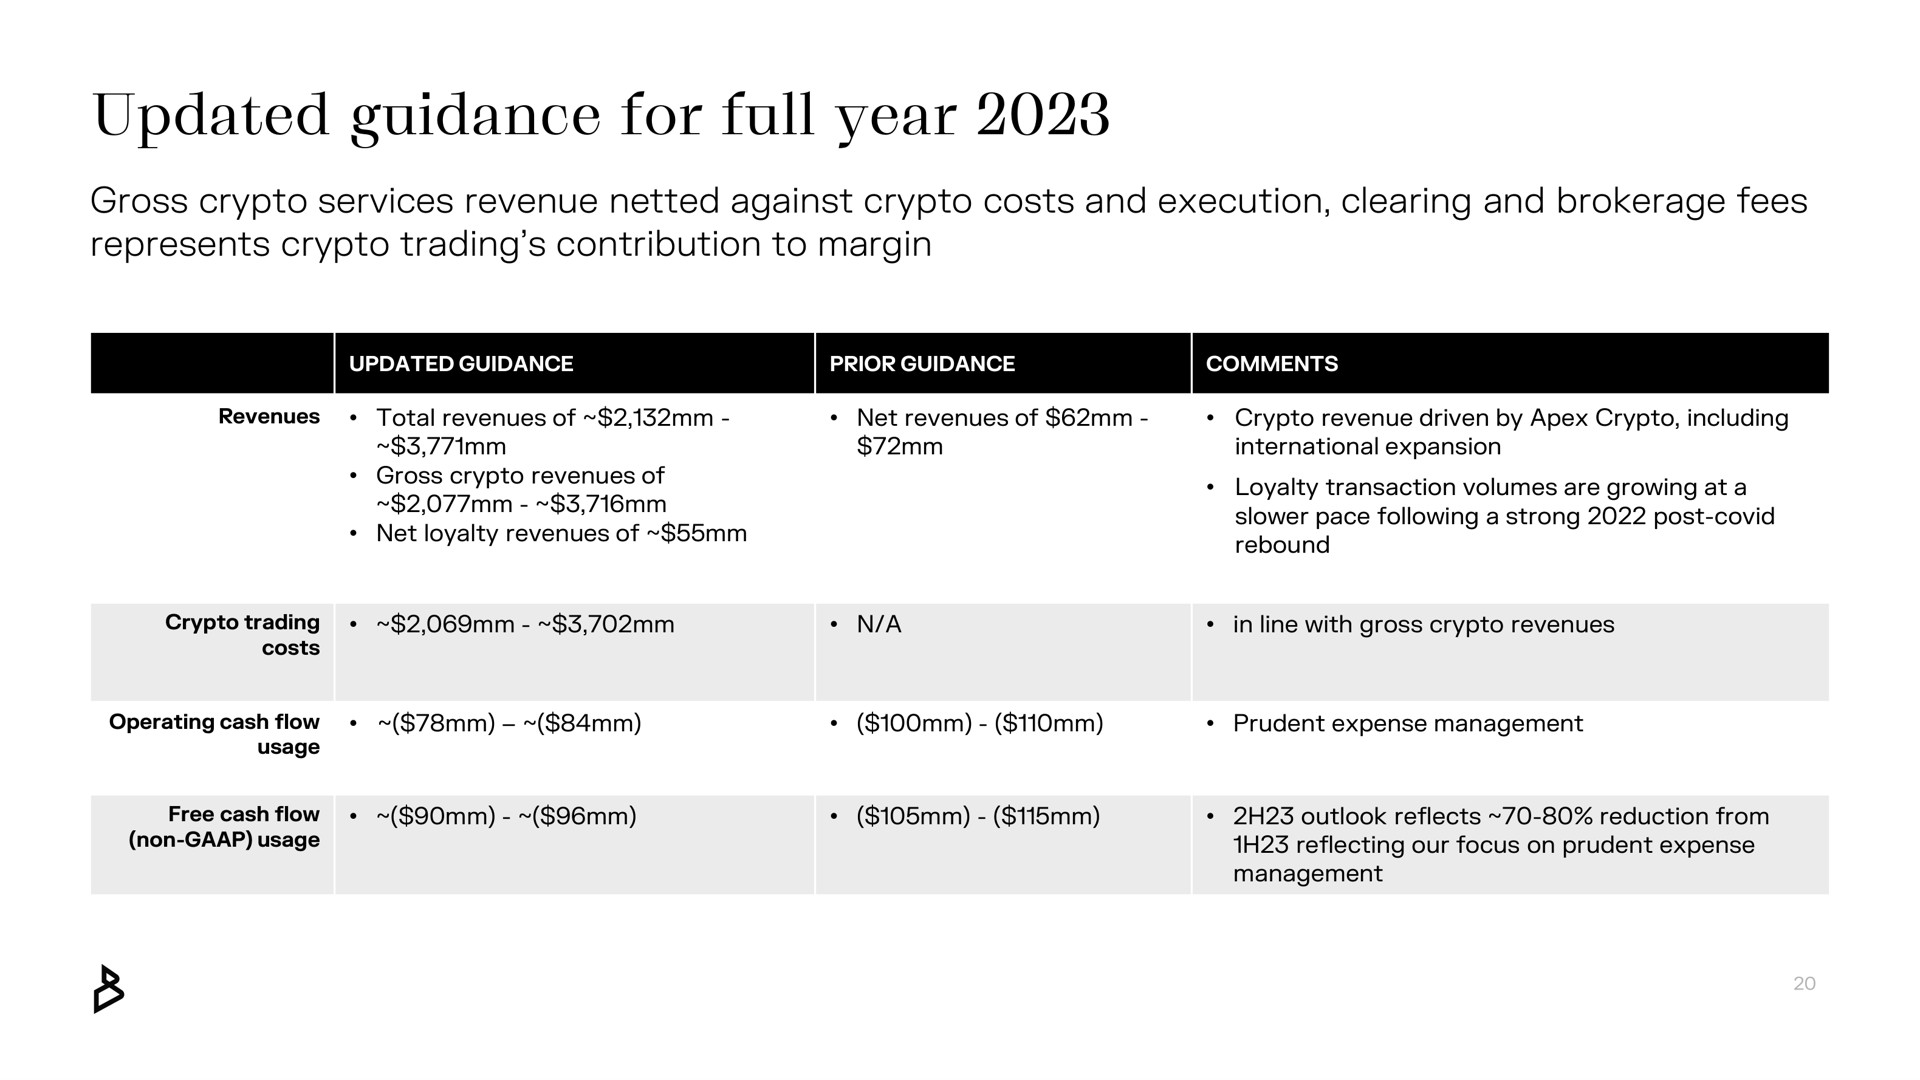 updated guidance for full year gross services revenue netted against costs and execution clearing and brokerage fees represents trading contribution to margin | Bakkt